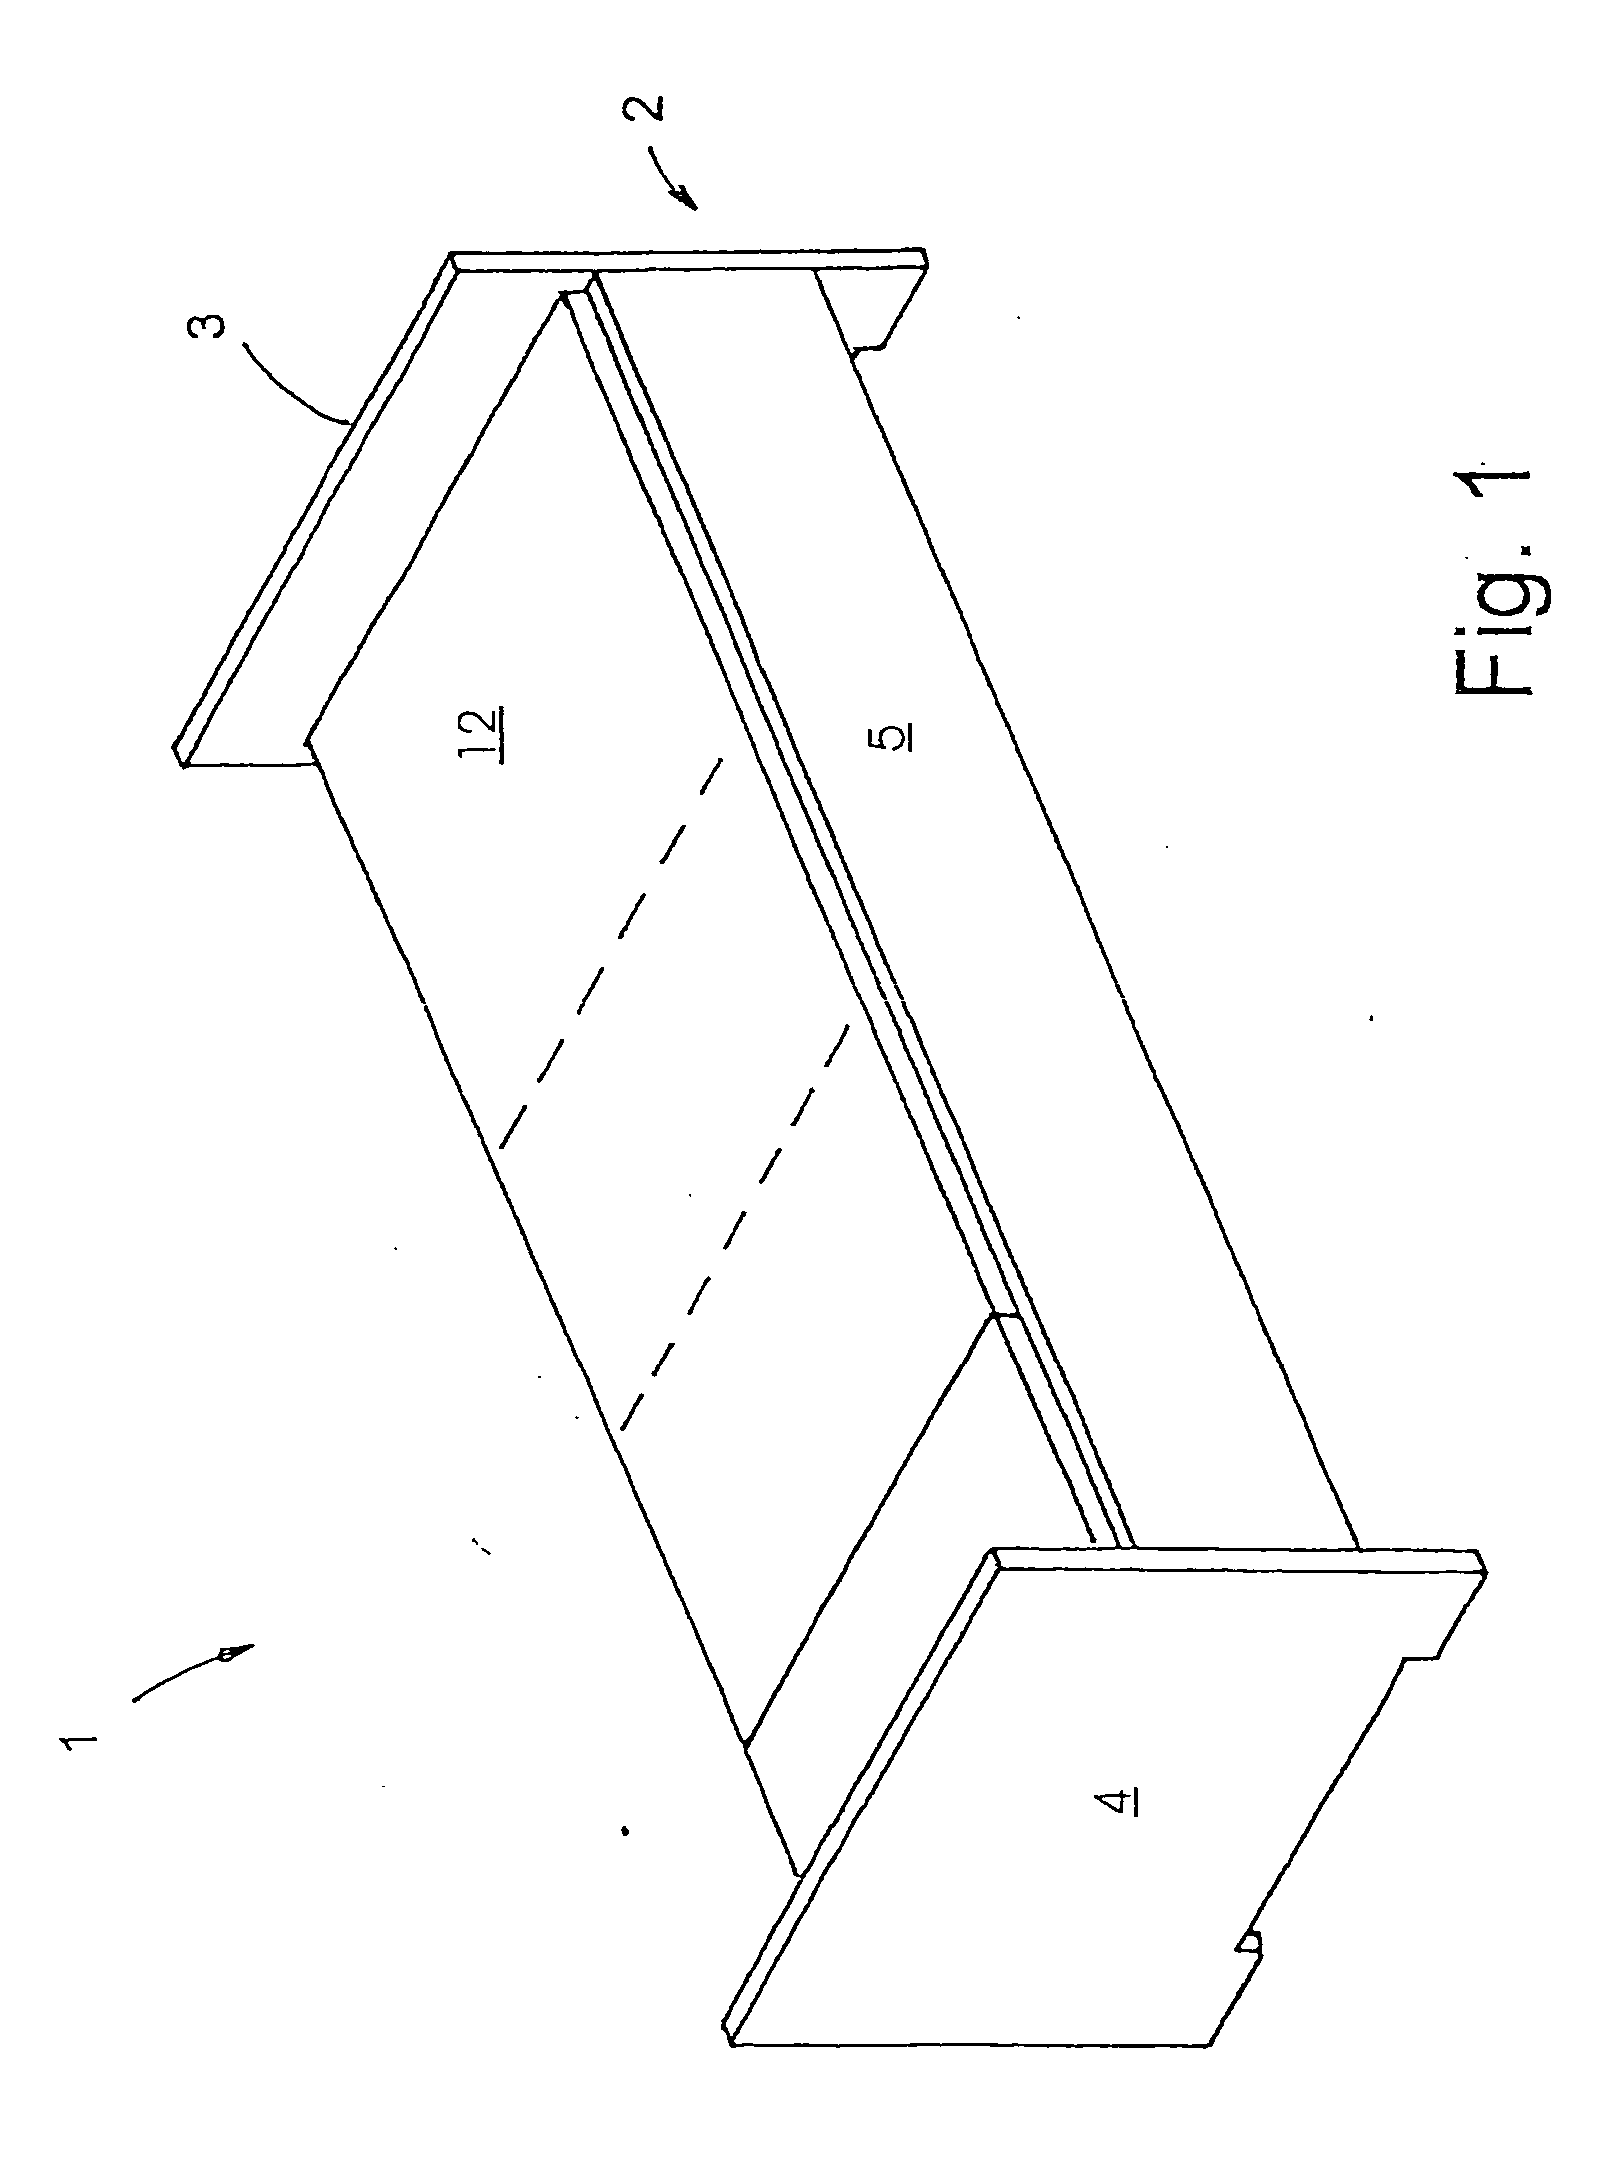 Nursing bed with improved lifting mechanism